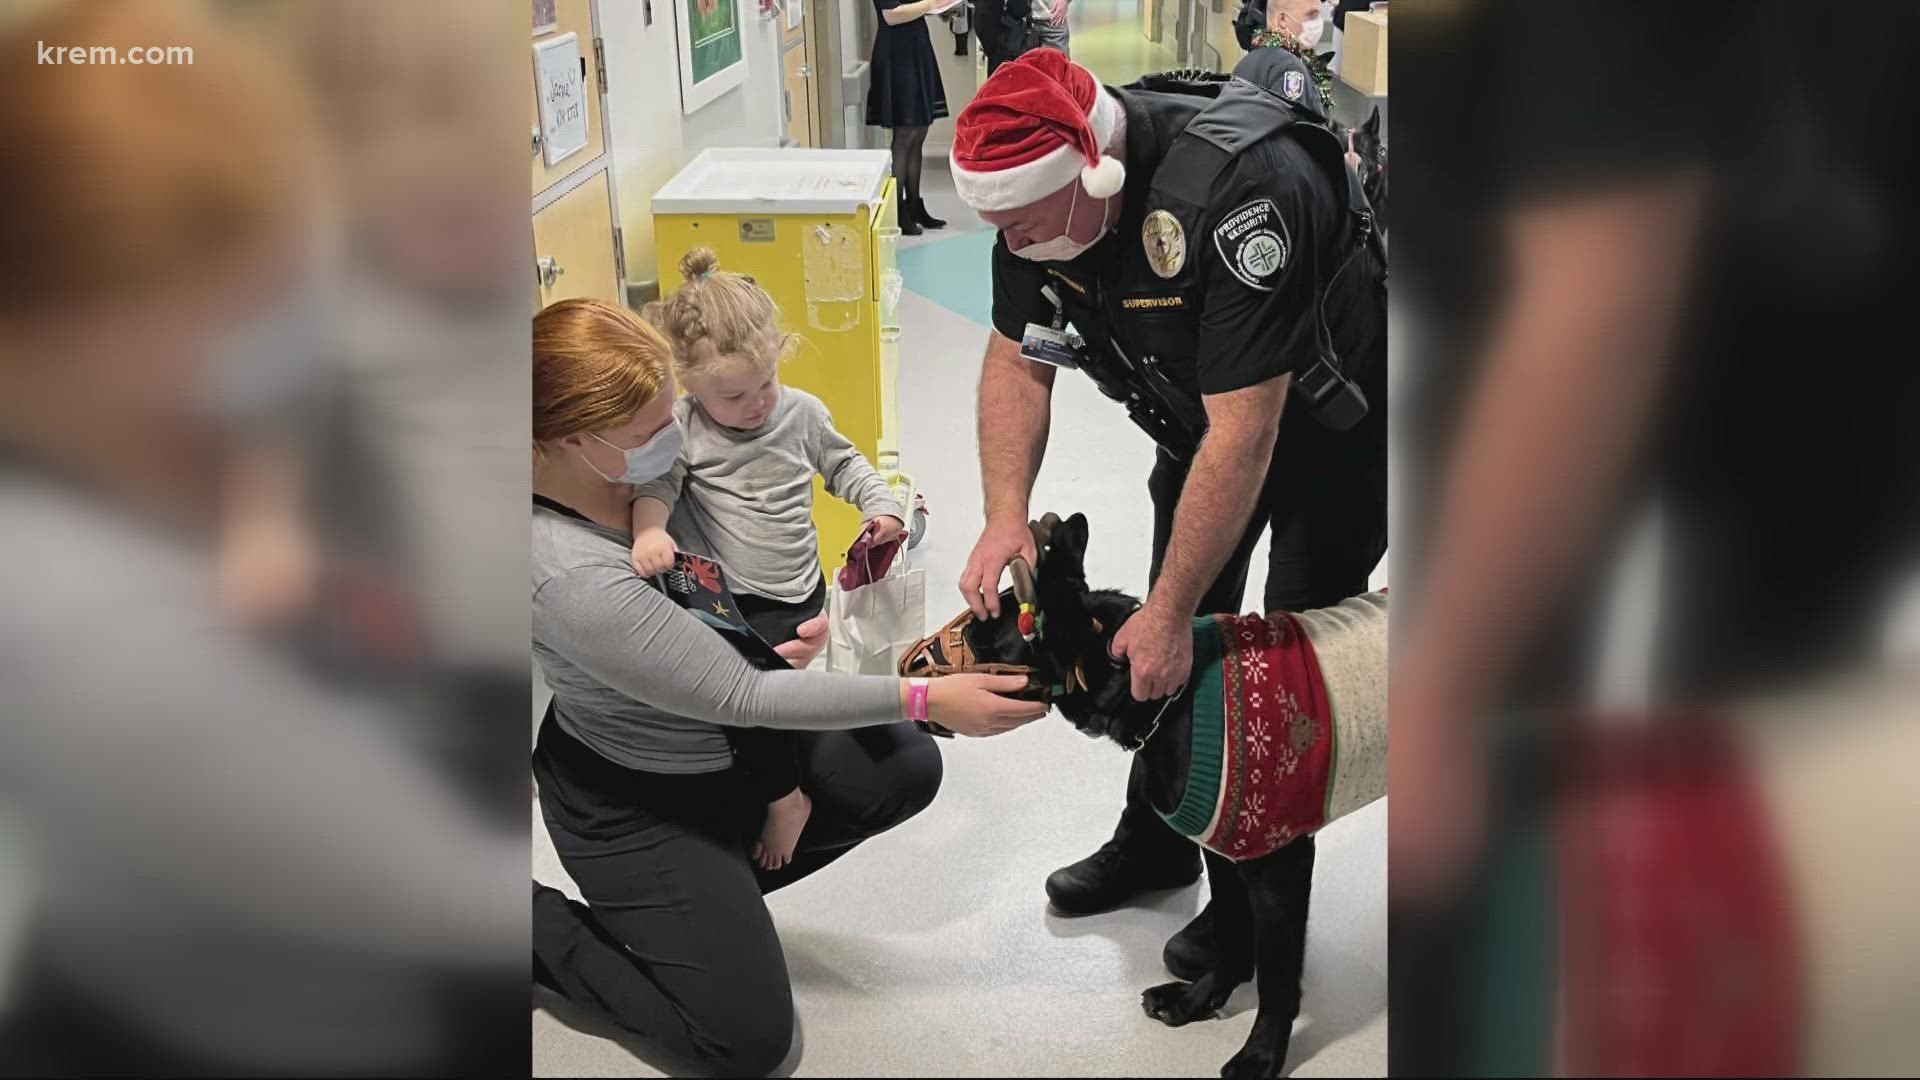 K-9 team members delivered Christmas presents to the children at the hospital, who also enjoyed the visit of the police dogs.